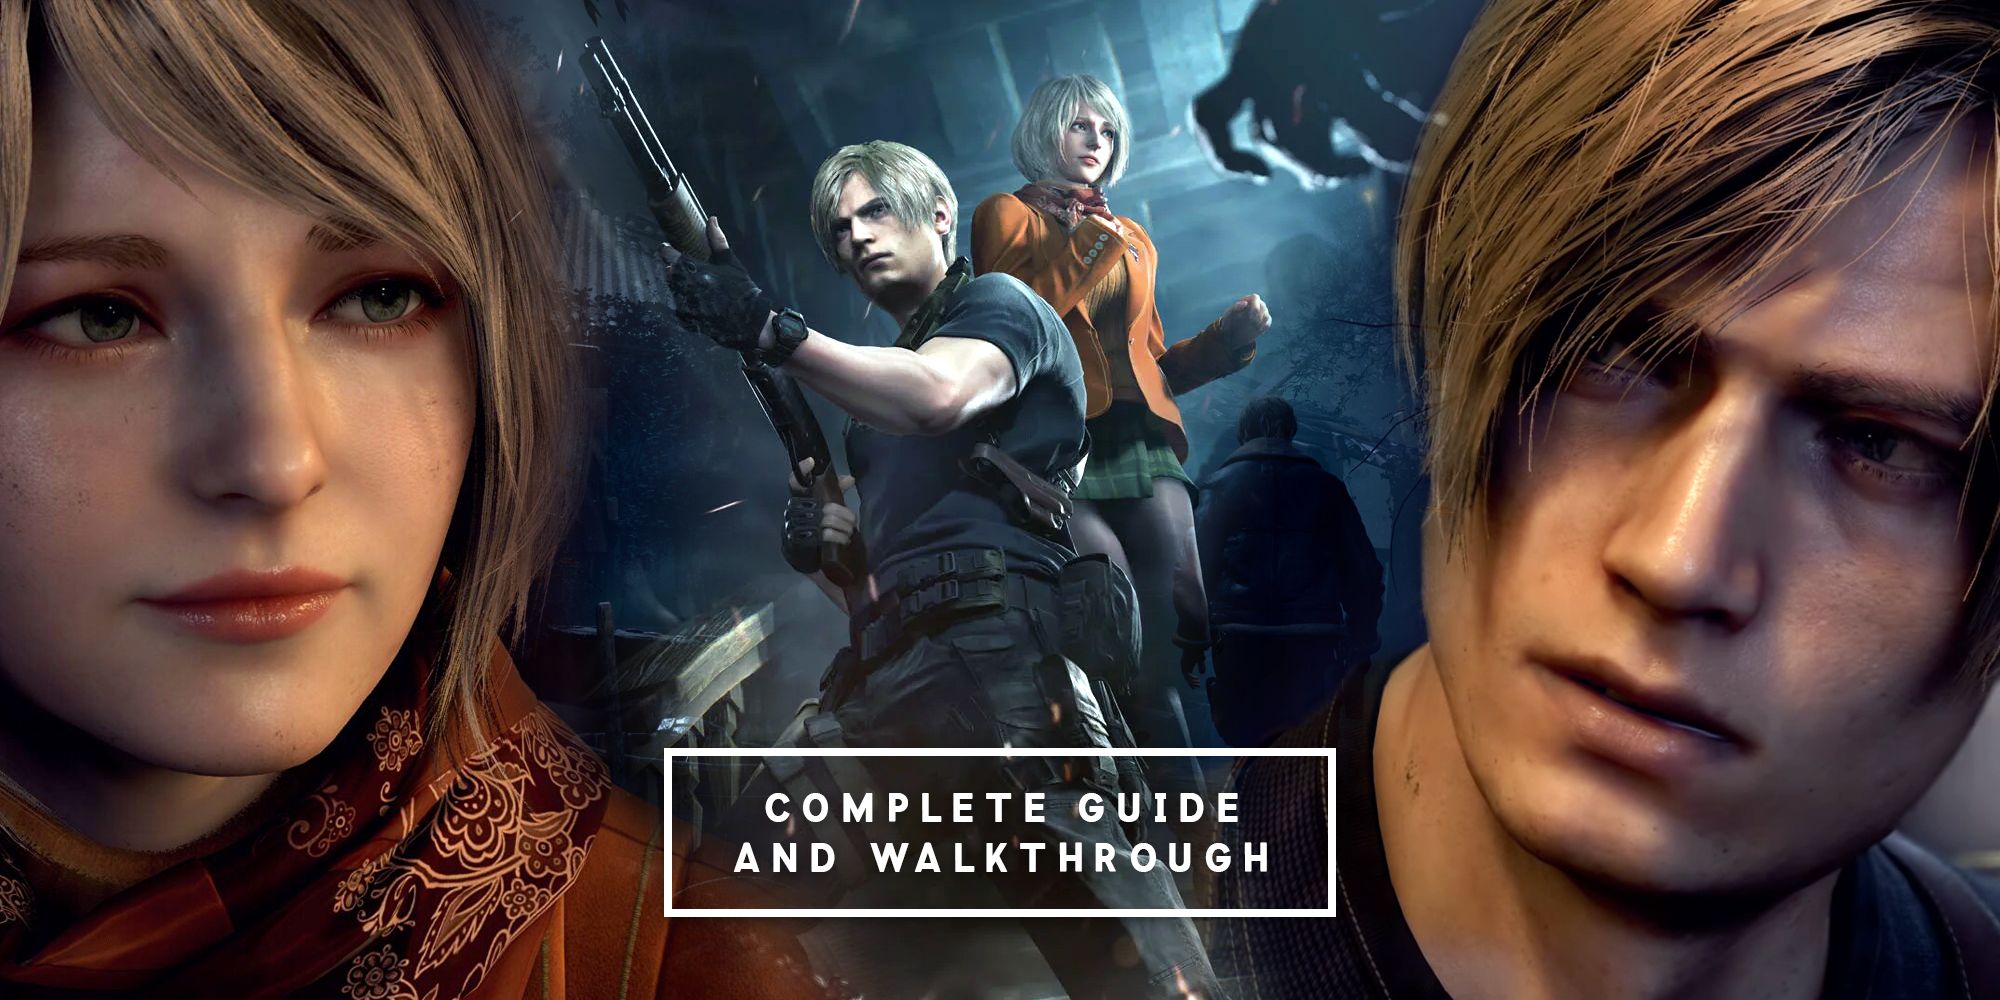 Resident Evil 4 walkthrough, tips and tricks to guide you through